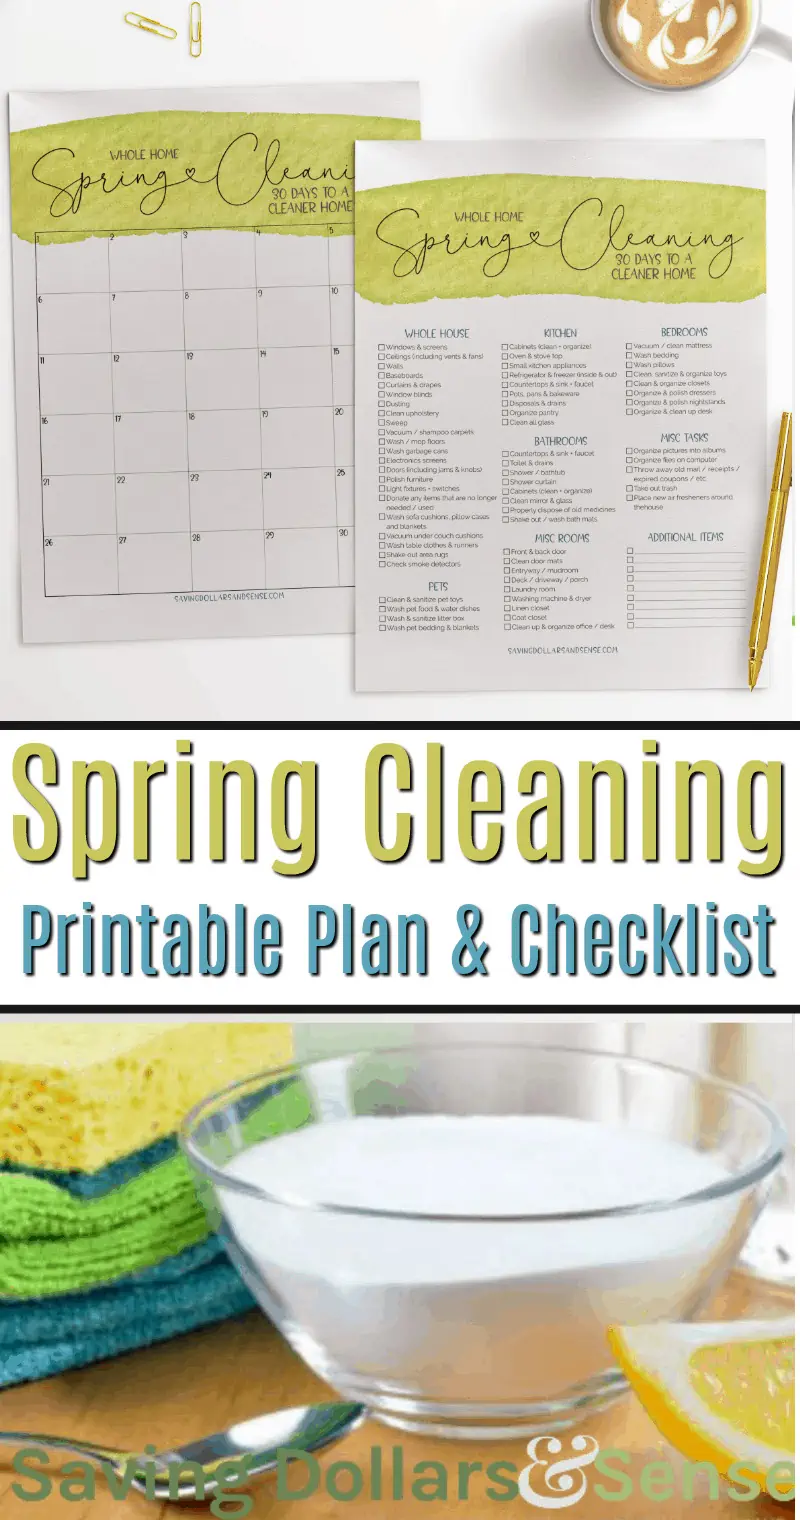 Printable House Cleaning Plan for Spring Cleaning